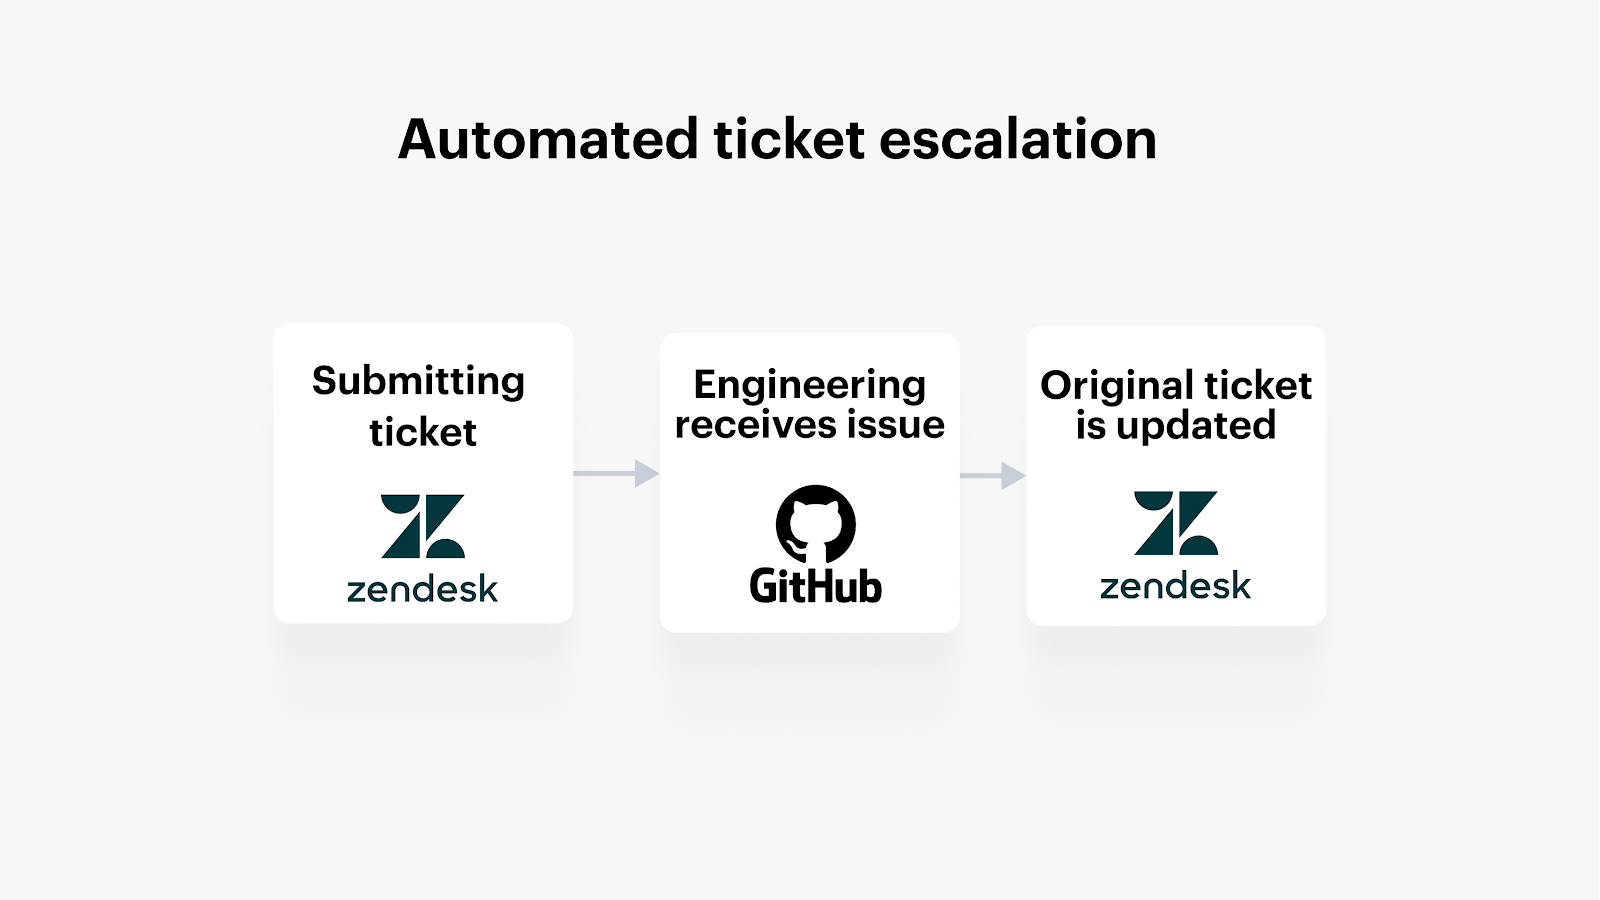 How to sync and escalate tickets across teams